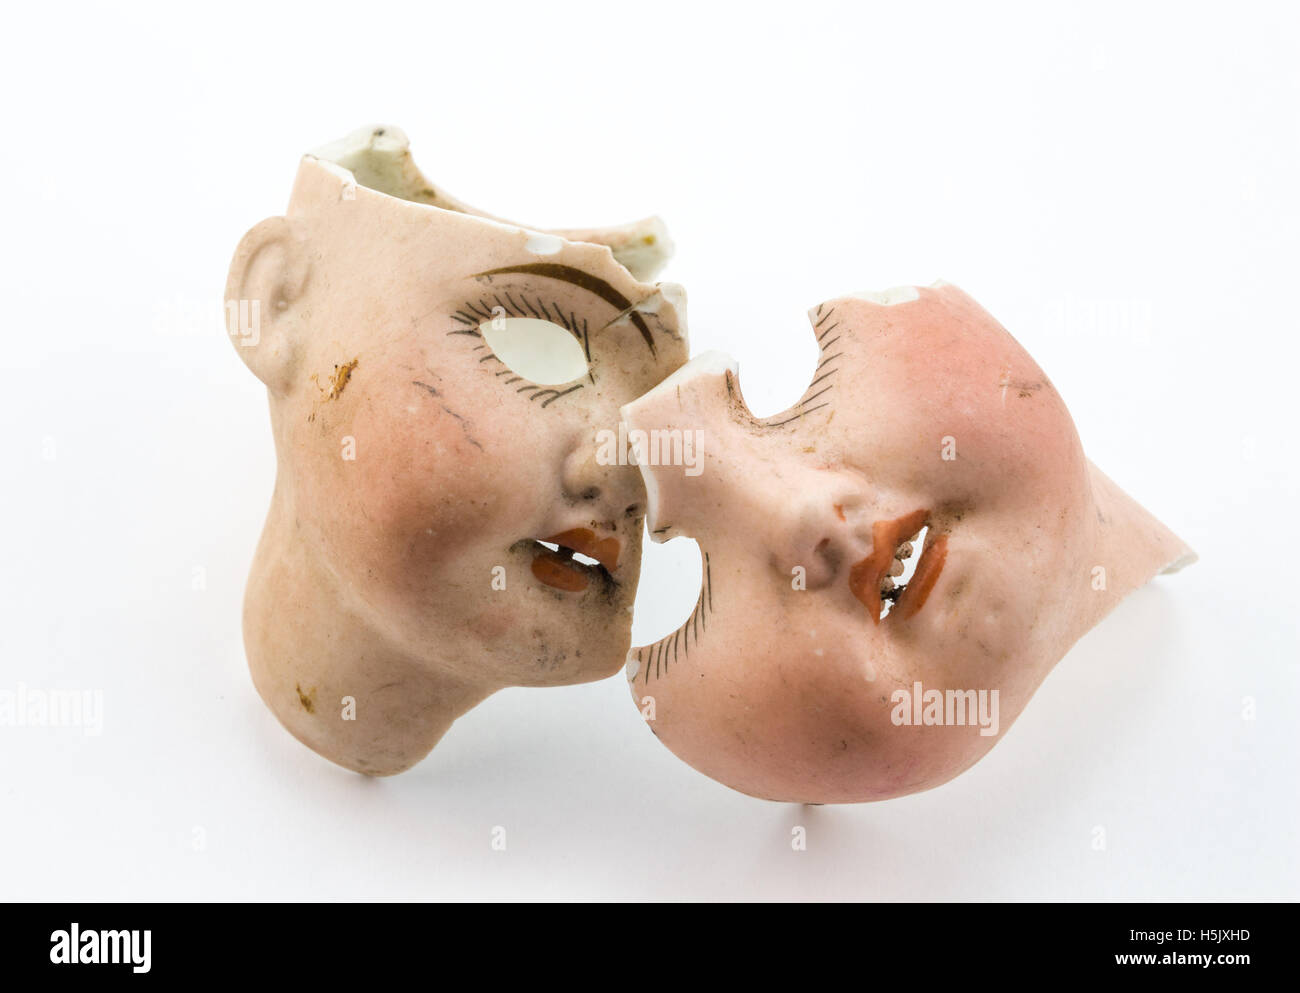 Broken doll parts on white background Stock Photo